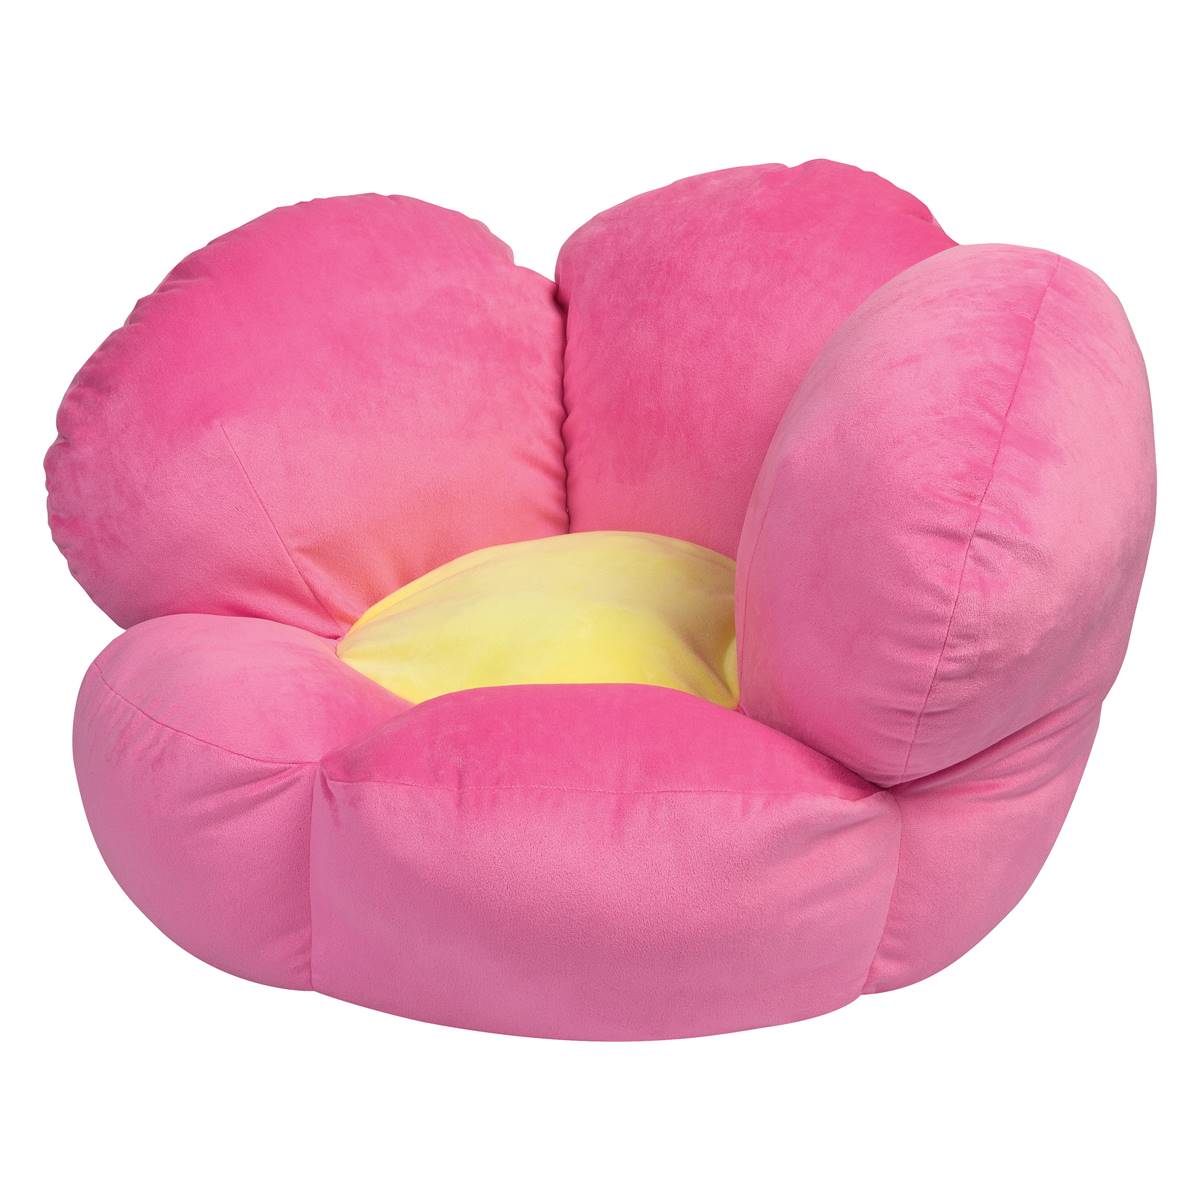 Trend Lab(R) Plush Flower Character Chair